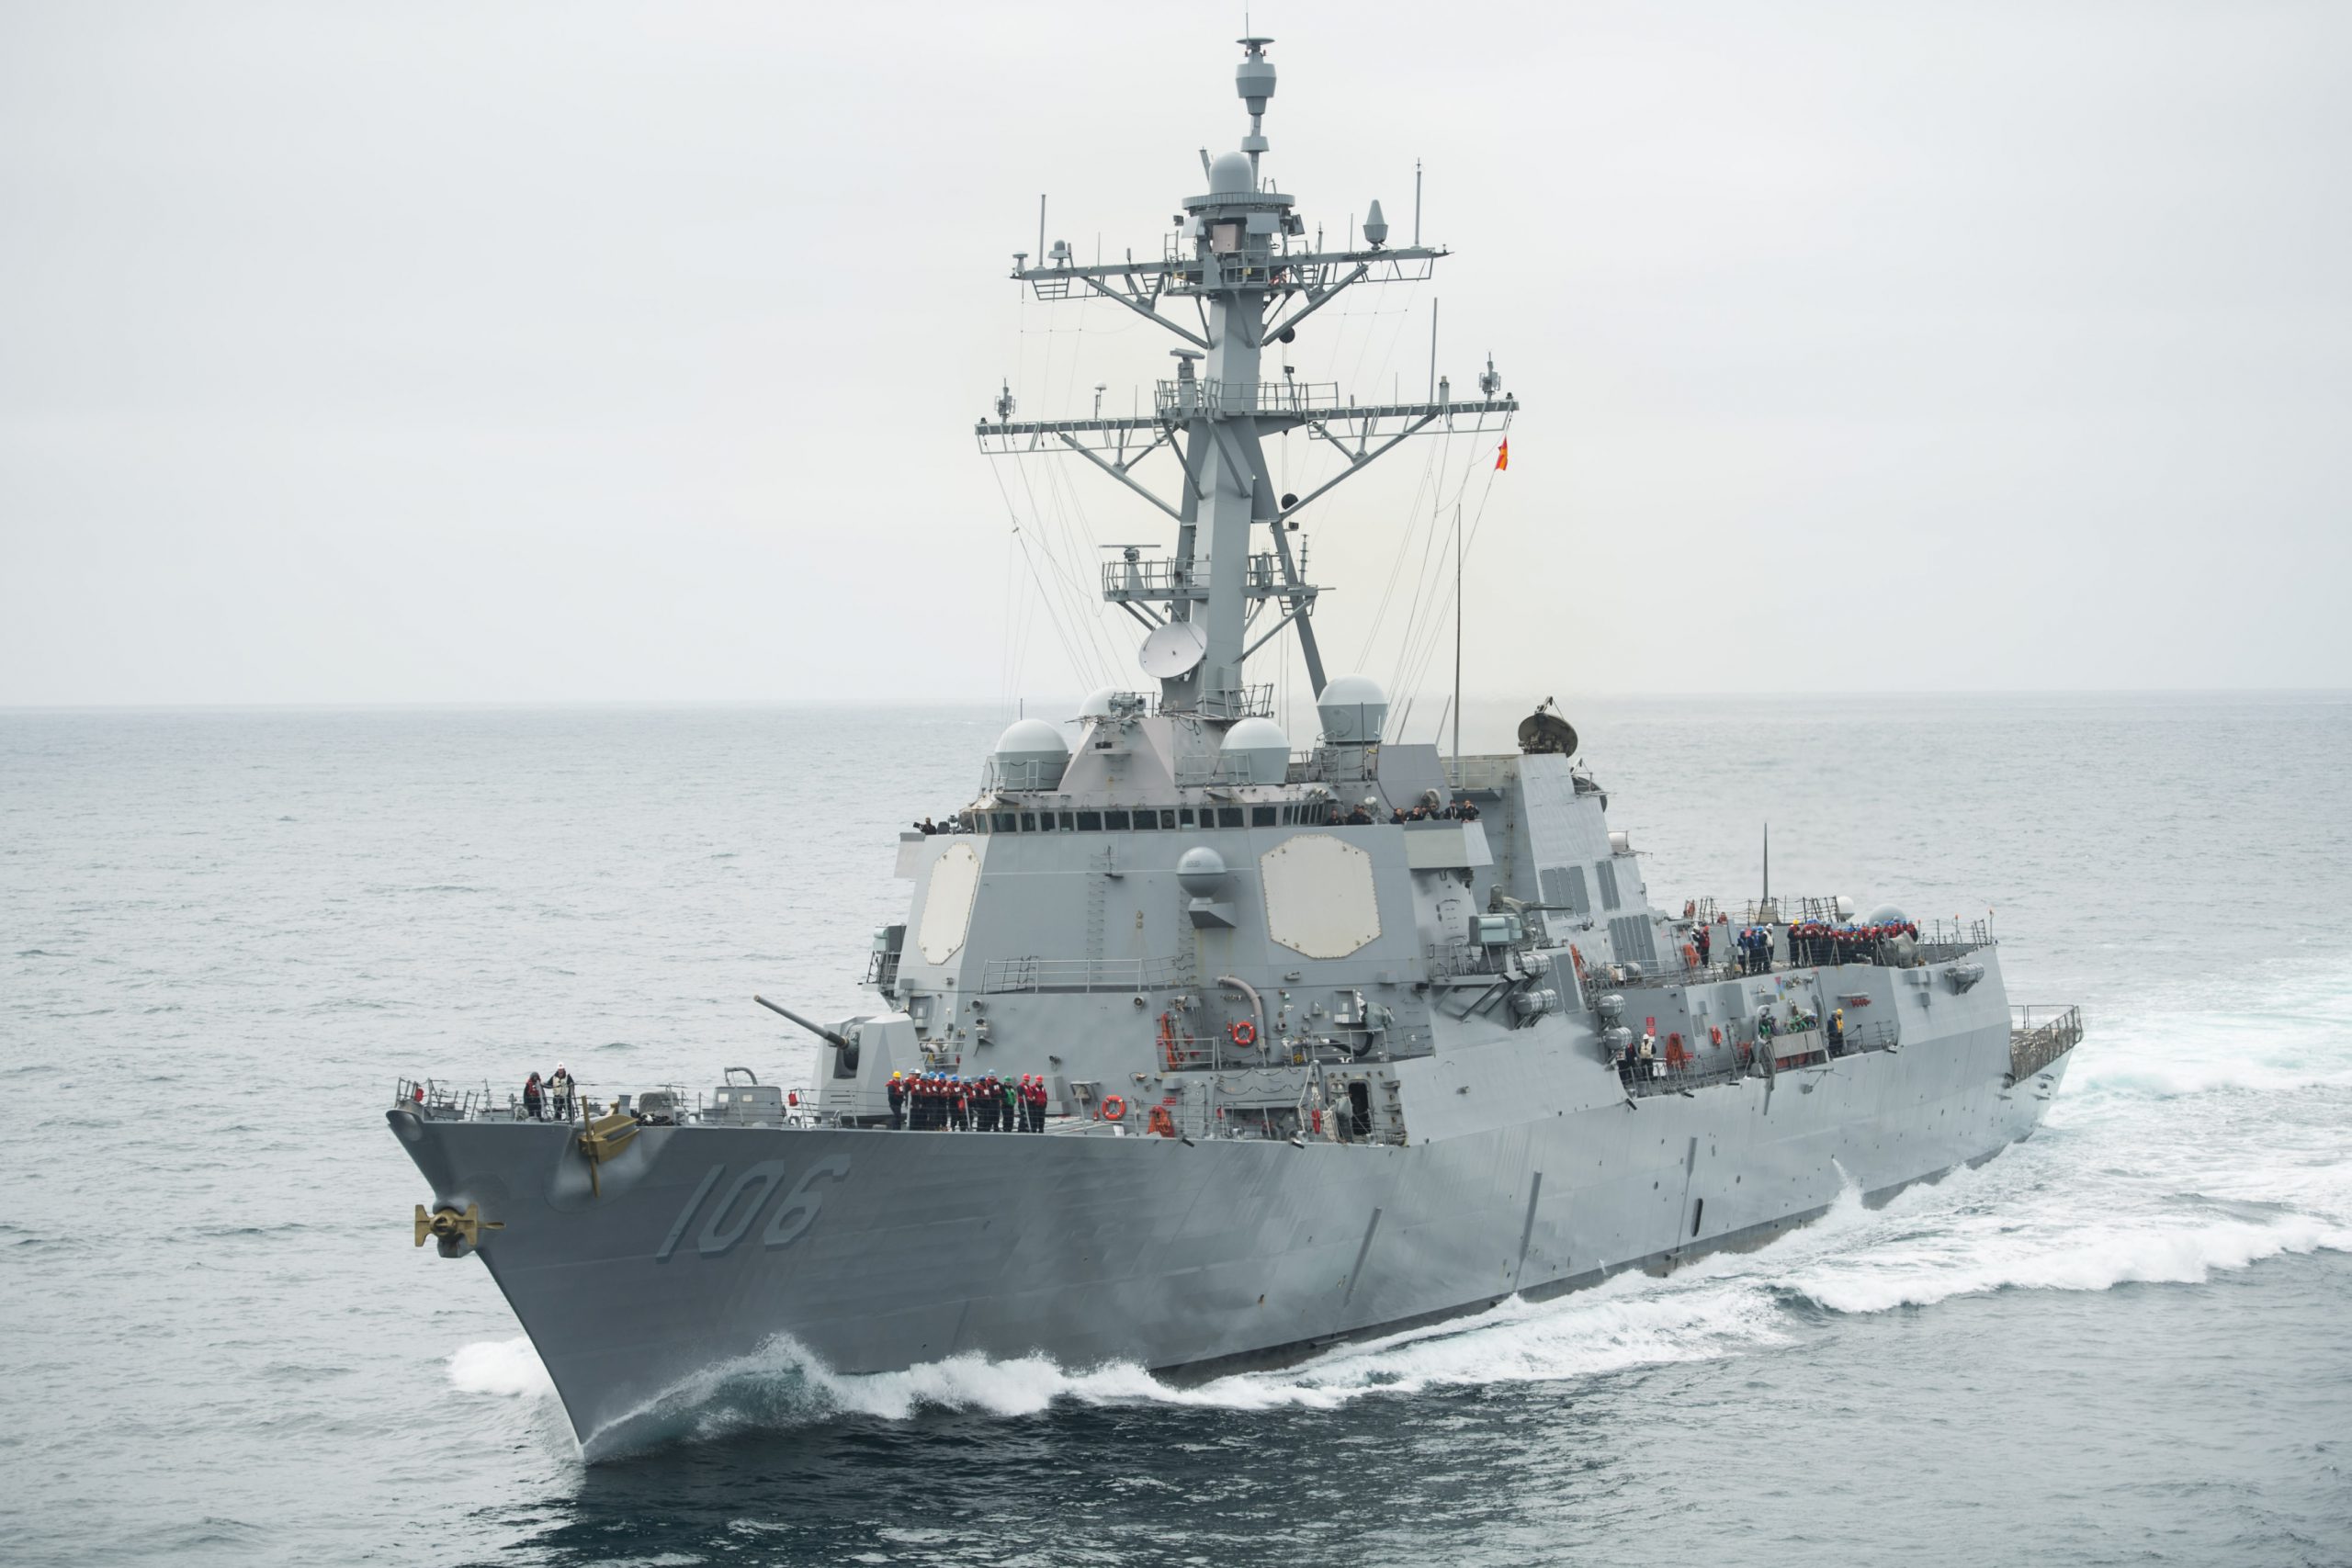 180507-N-UD522-0102 PACIFIC OCEAN (May 7, 2018) The Arleigh Burke-class guided-missile destroyer USS Stockdale (DDG 106) prepares for a replenishment-at-sea with the aircraft carrier USS John C. Stennis (CVN 74). Stockdale is underway with the ships and squadrons of Carrier Strike Group (CSG) 3 conducting group sail training in preparation for its next scheduled deployment. U.S. Navy photo by Mass Communication Specialist 2nd Class David A. Brandenburg. -